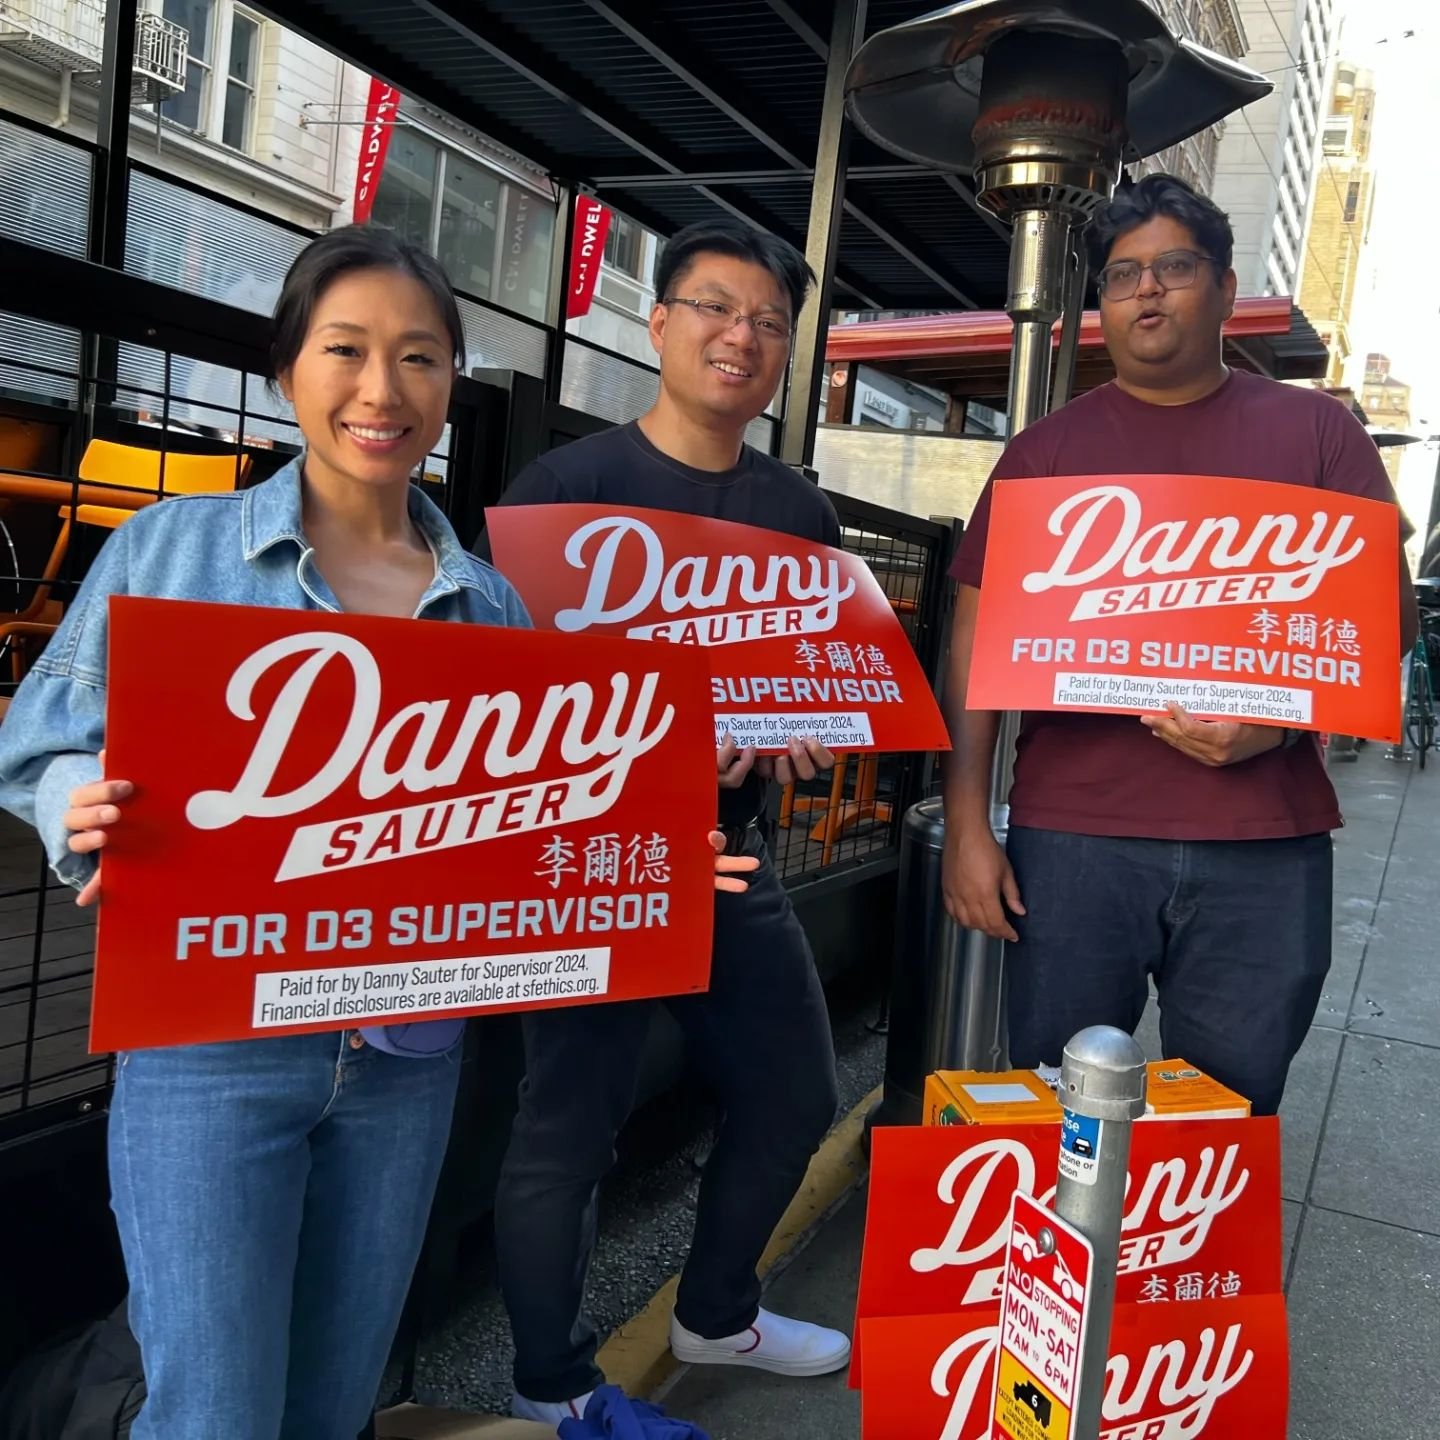 Thank you to Team Danny for showing up strong to last night's District 3 debate in Union Square! 👏

Enjoyed our discussion with @alicelgbtqdems @uniteddemclubsf @sf.yimby and @edleedems about the need to bring new forward-looking leadership to Distr